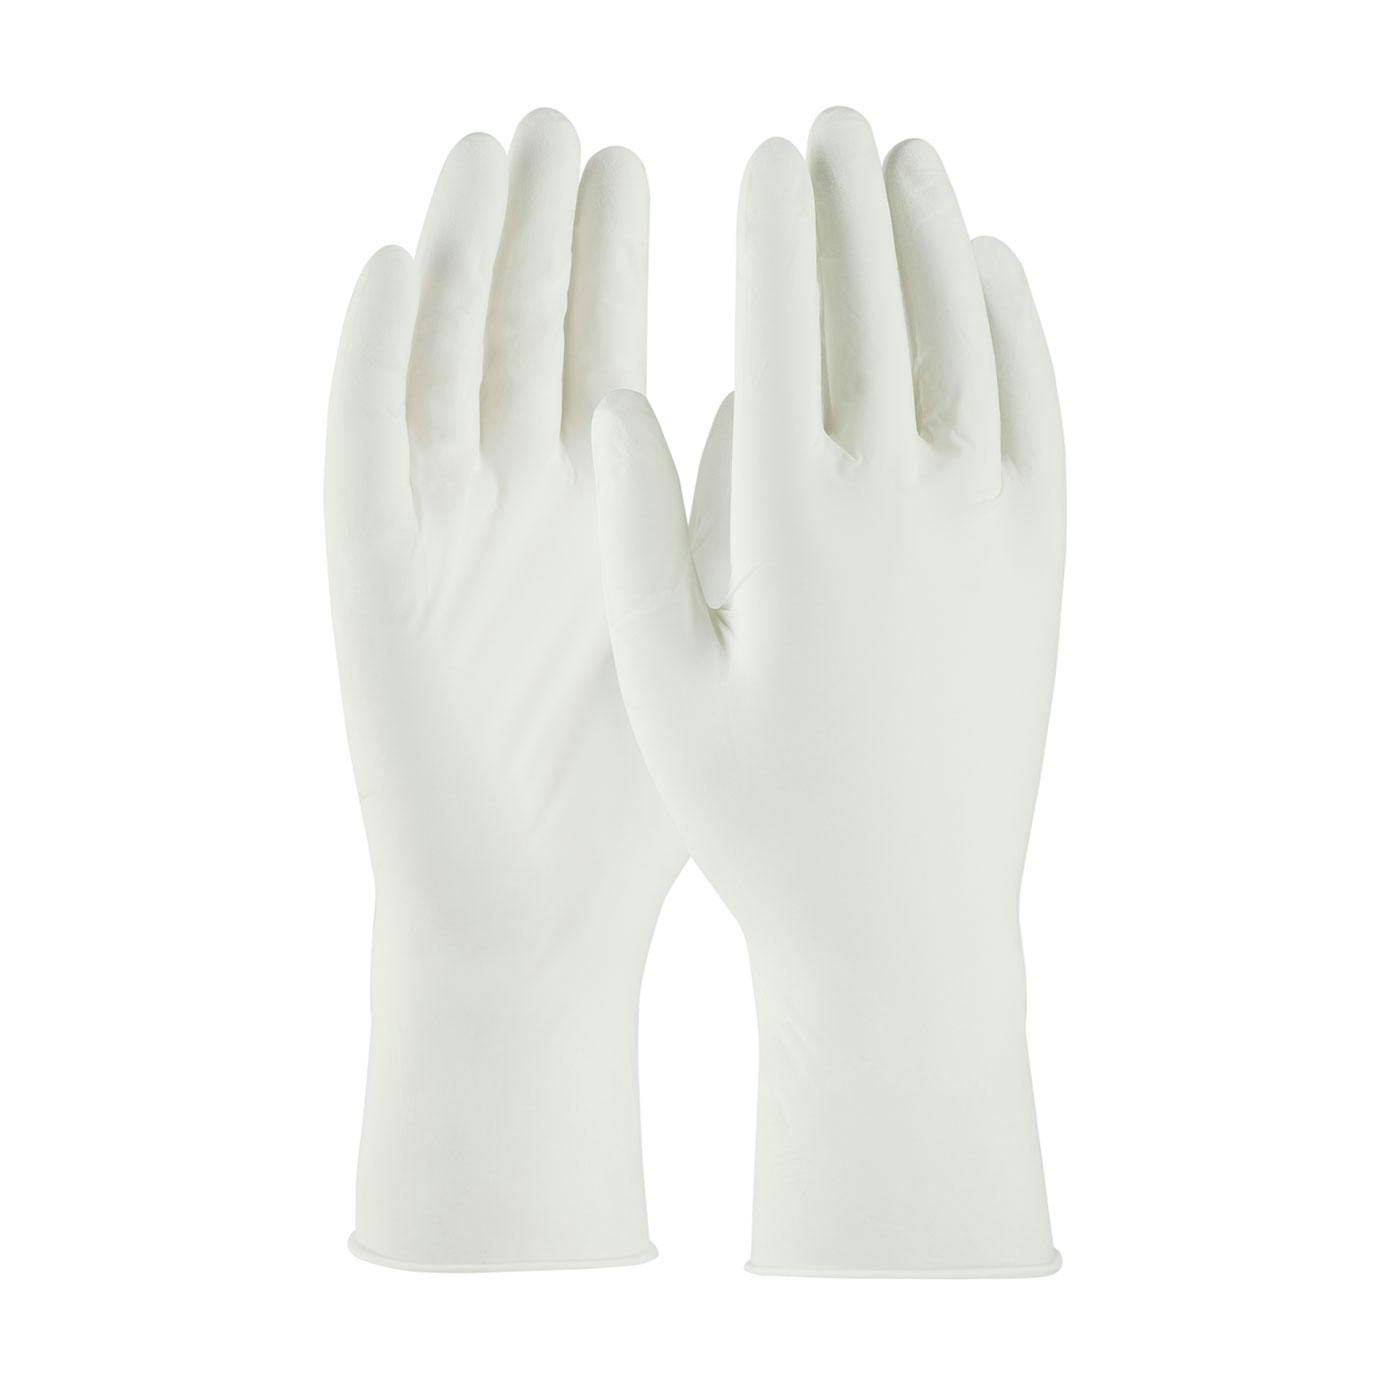 CleanTeam® Single Use Class 10 Cleanroom Nitrile Glove with Finger Textured Grip - 12" (100-333010)